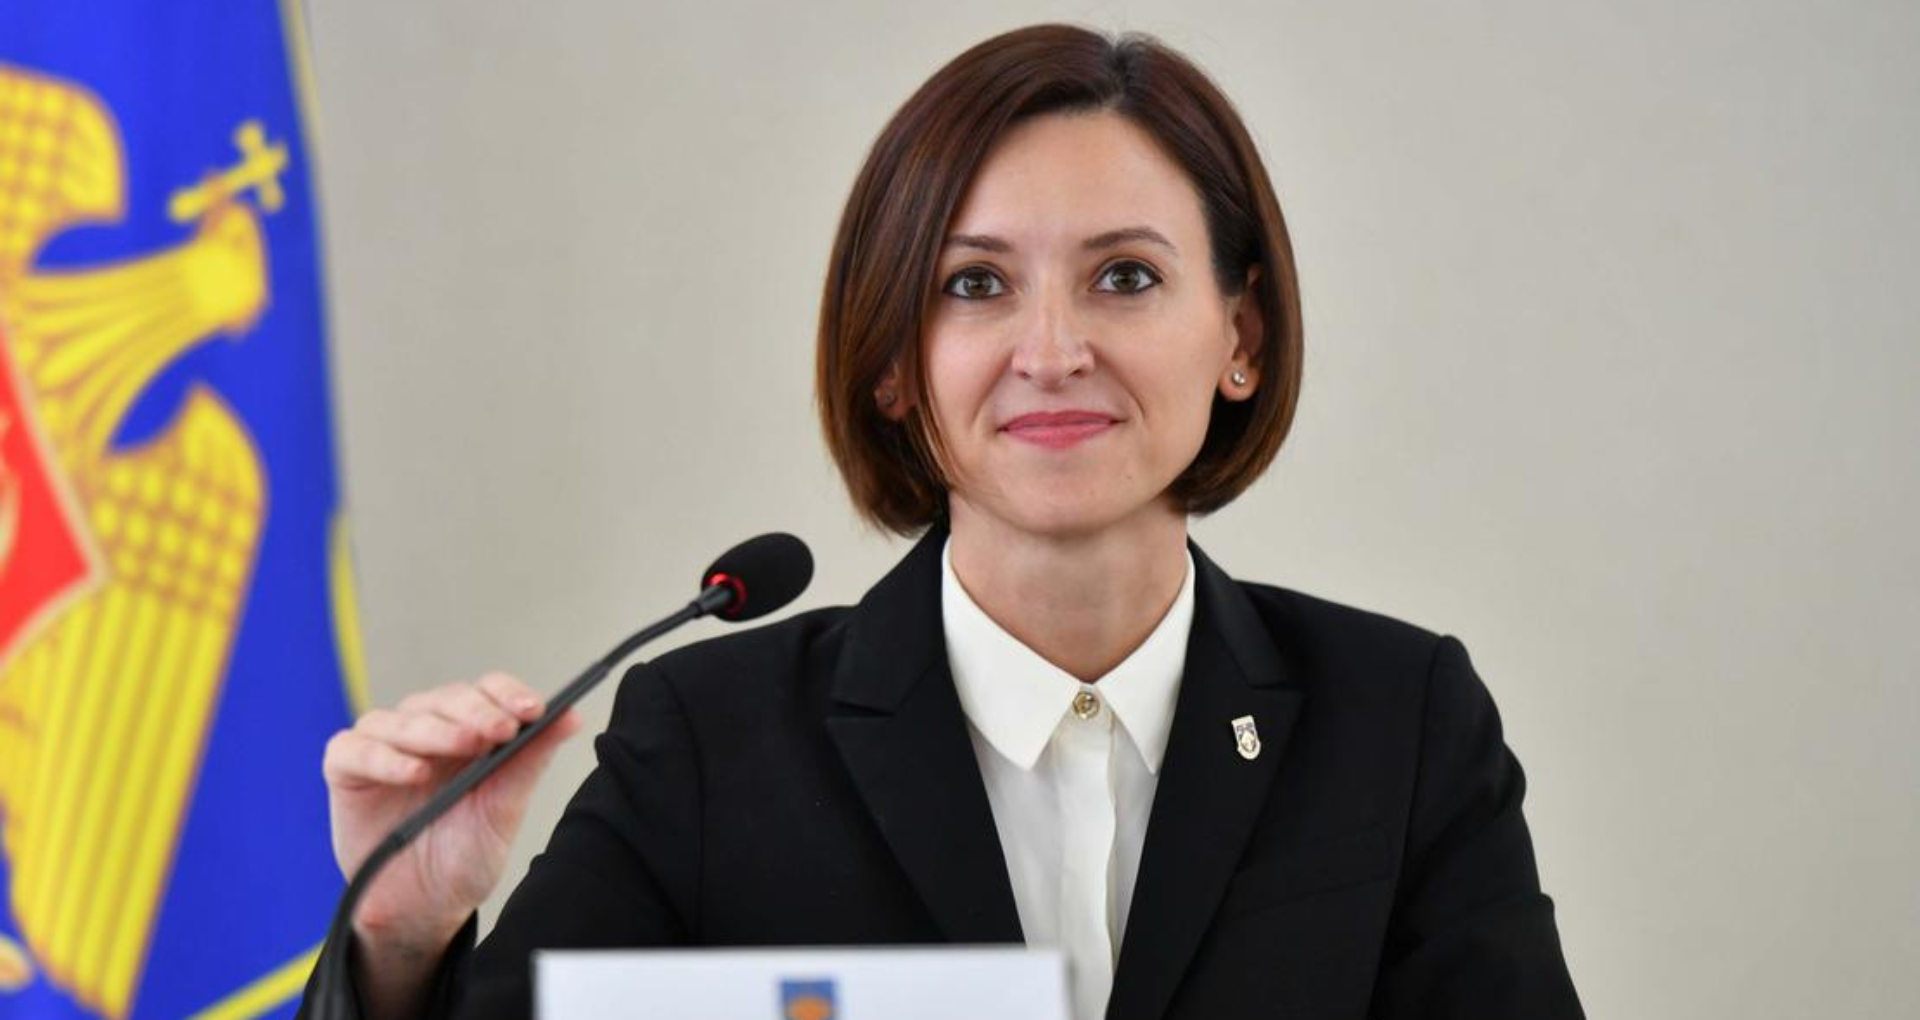 European Commissioner for Justice pays official visit to Moldova